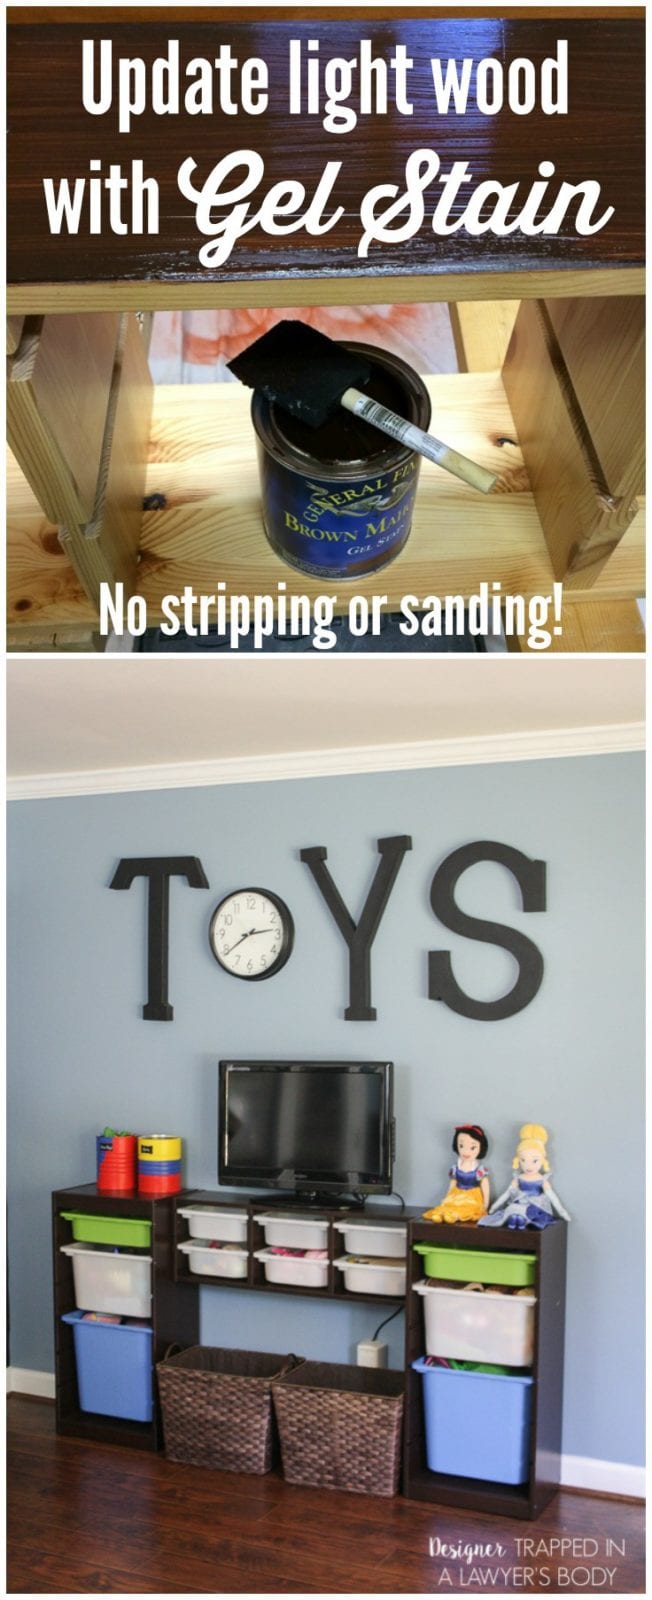 How To Use Gel Stain To Update Cabinets Designertrapped Com